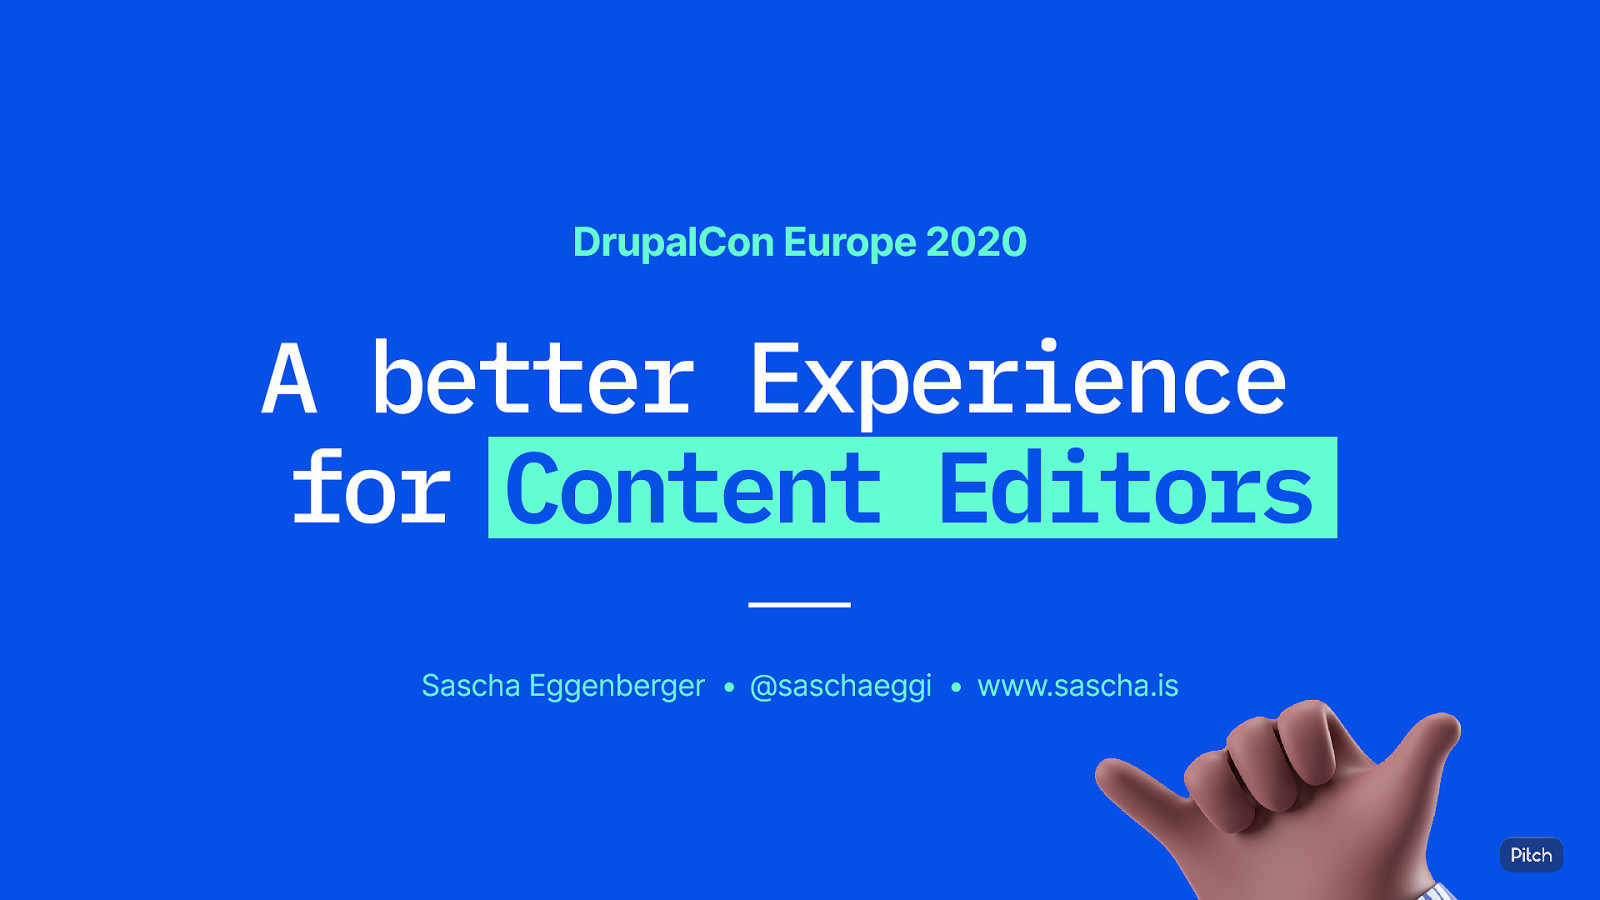 A better Experience for Content Editors